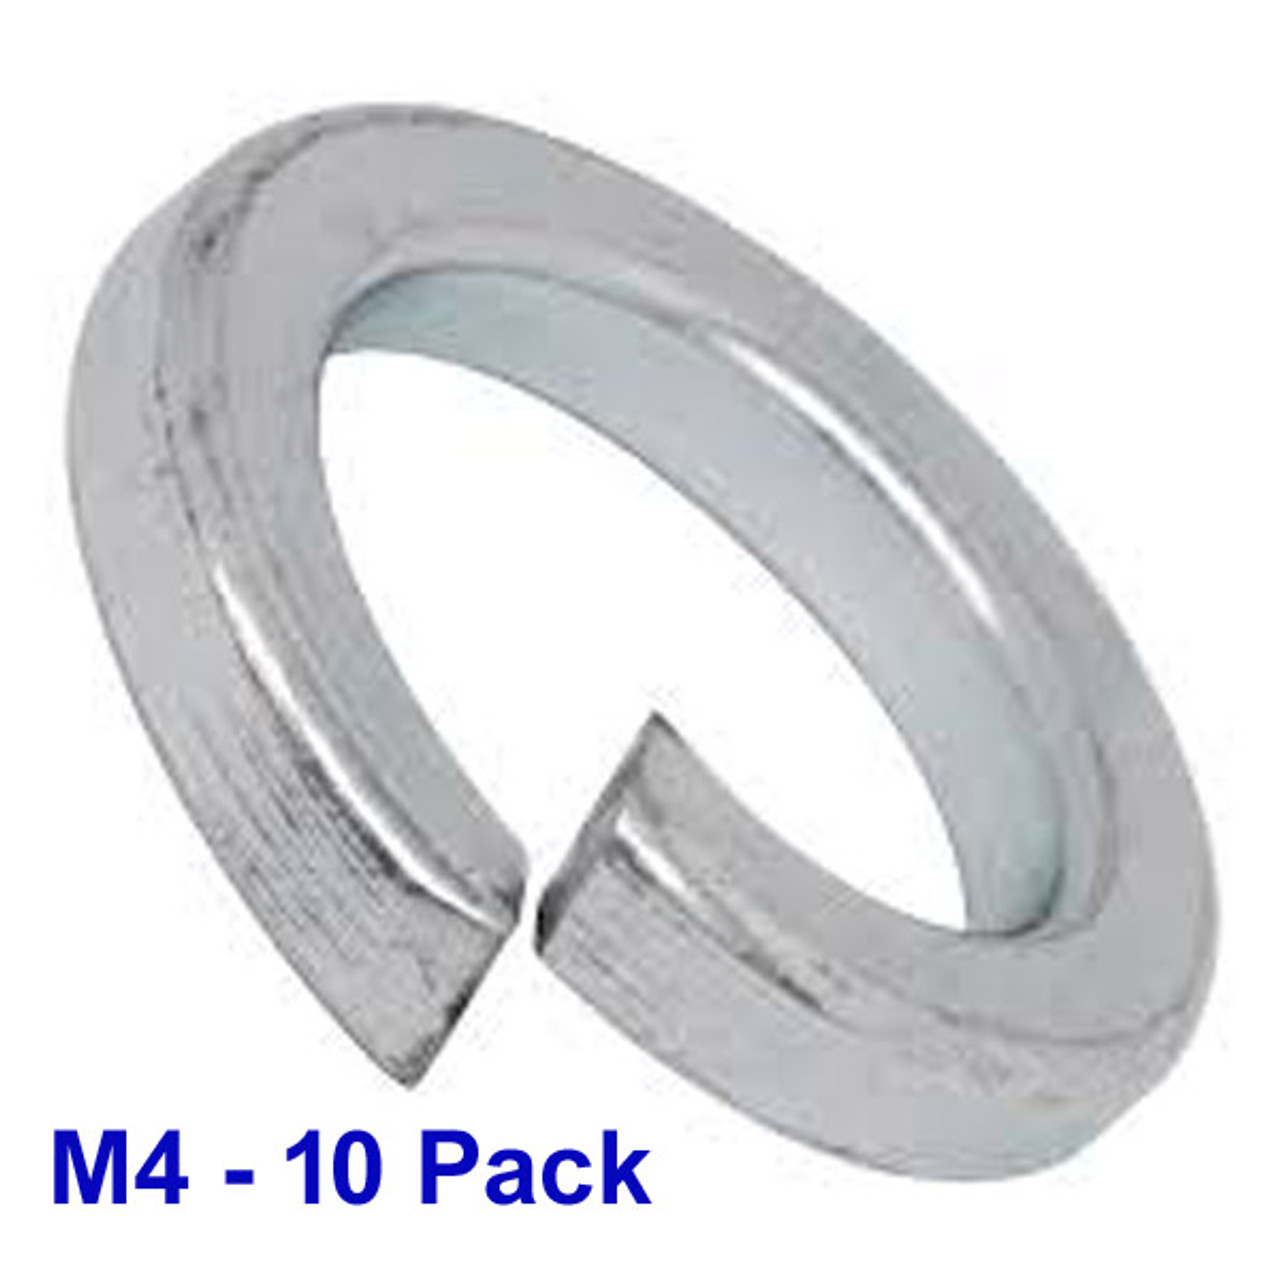 M4 Spring Washers - 10 pack - Stainless - (#WSS-410)